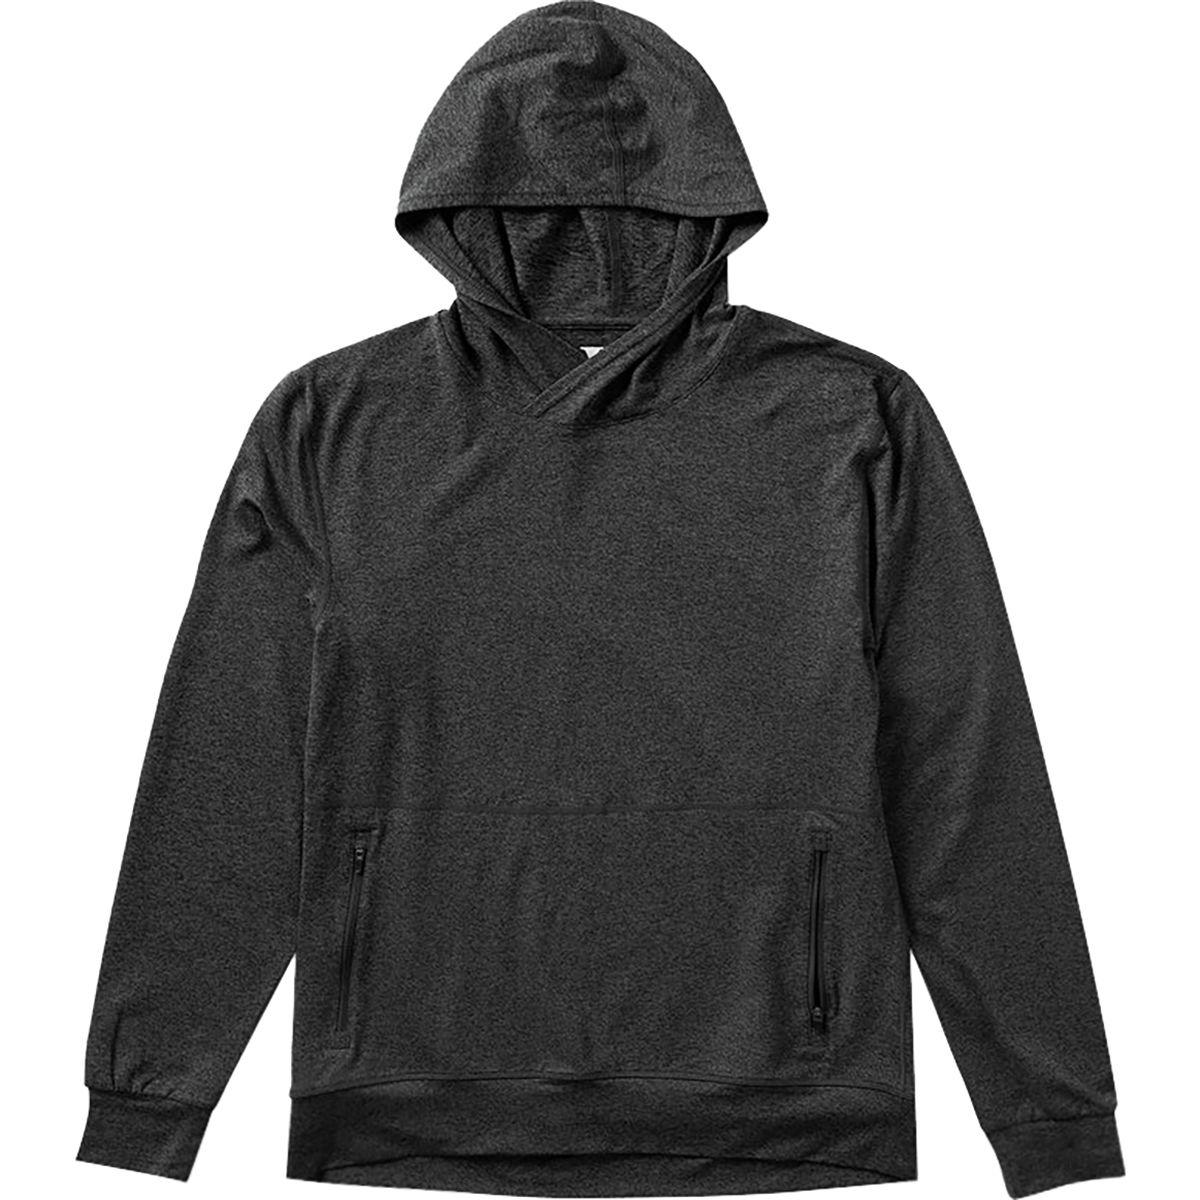 Vuori Ponto Performance Pullover Hoodie in Gray for Men - Lyst